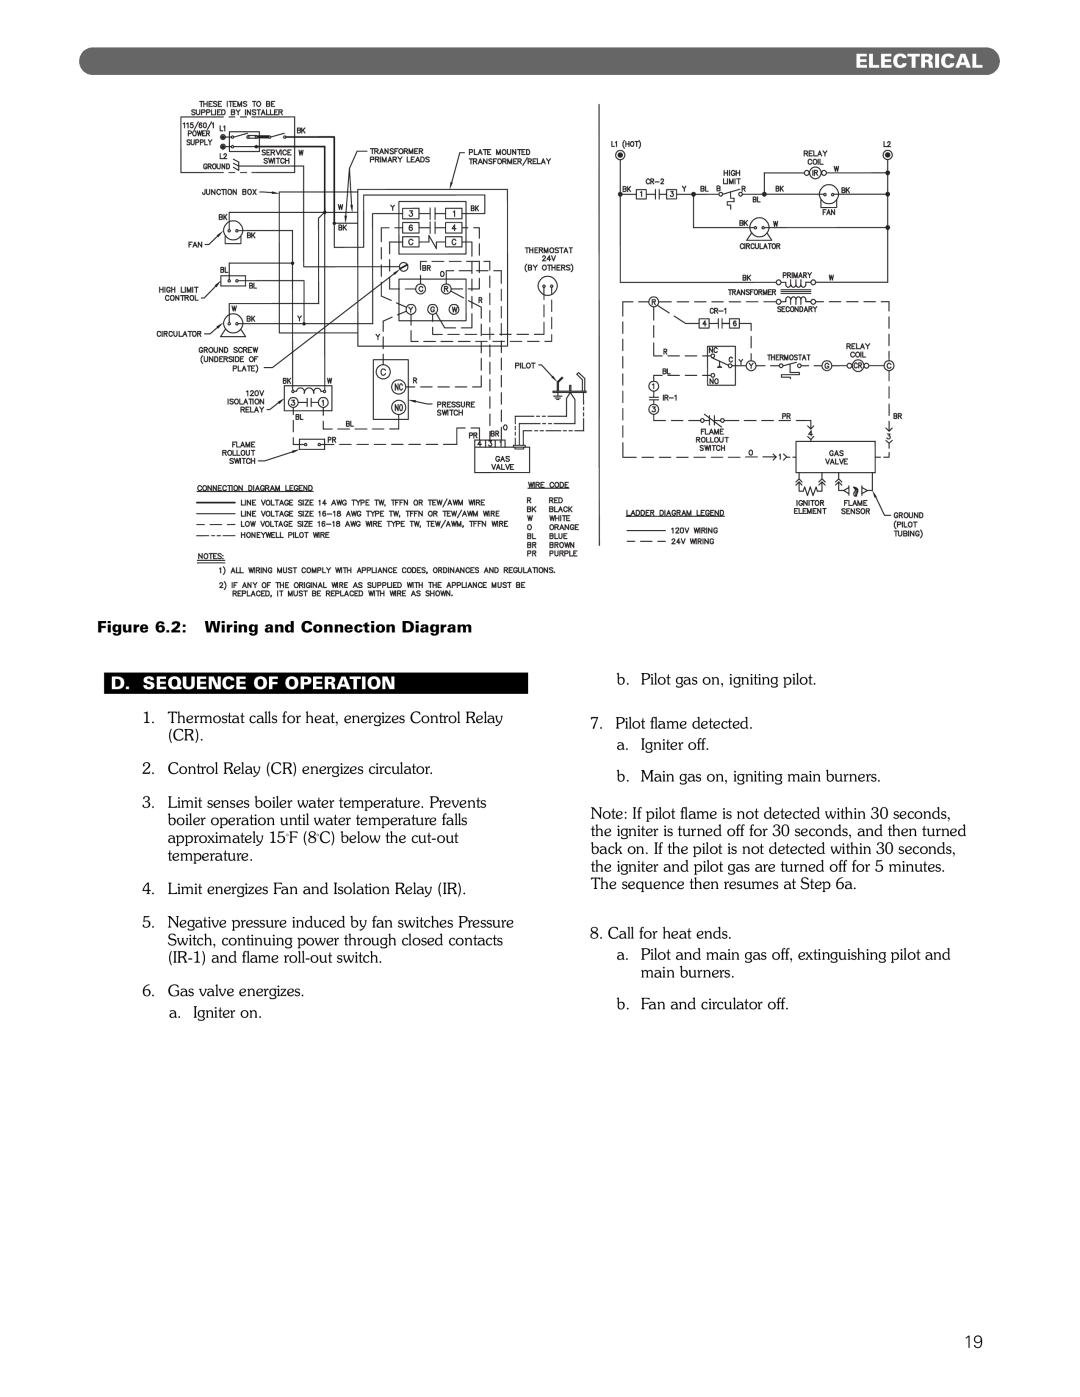 PB Heat DE manual Electrical, D.Sequence Of Operation, 2 Wiring and Connection Diagram 